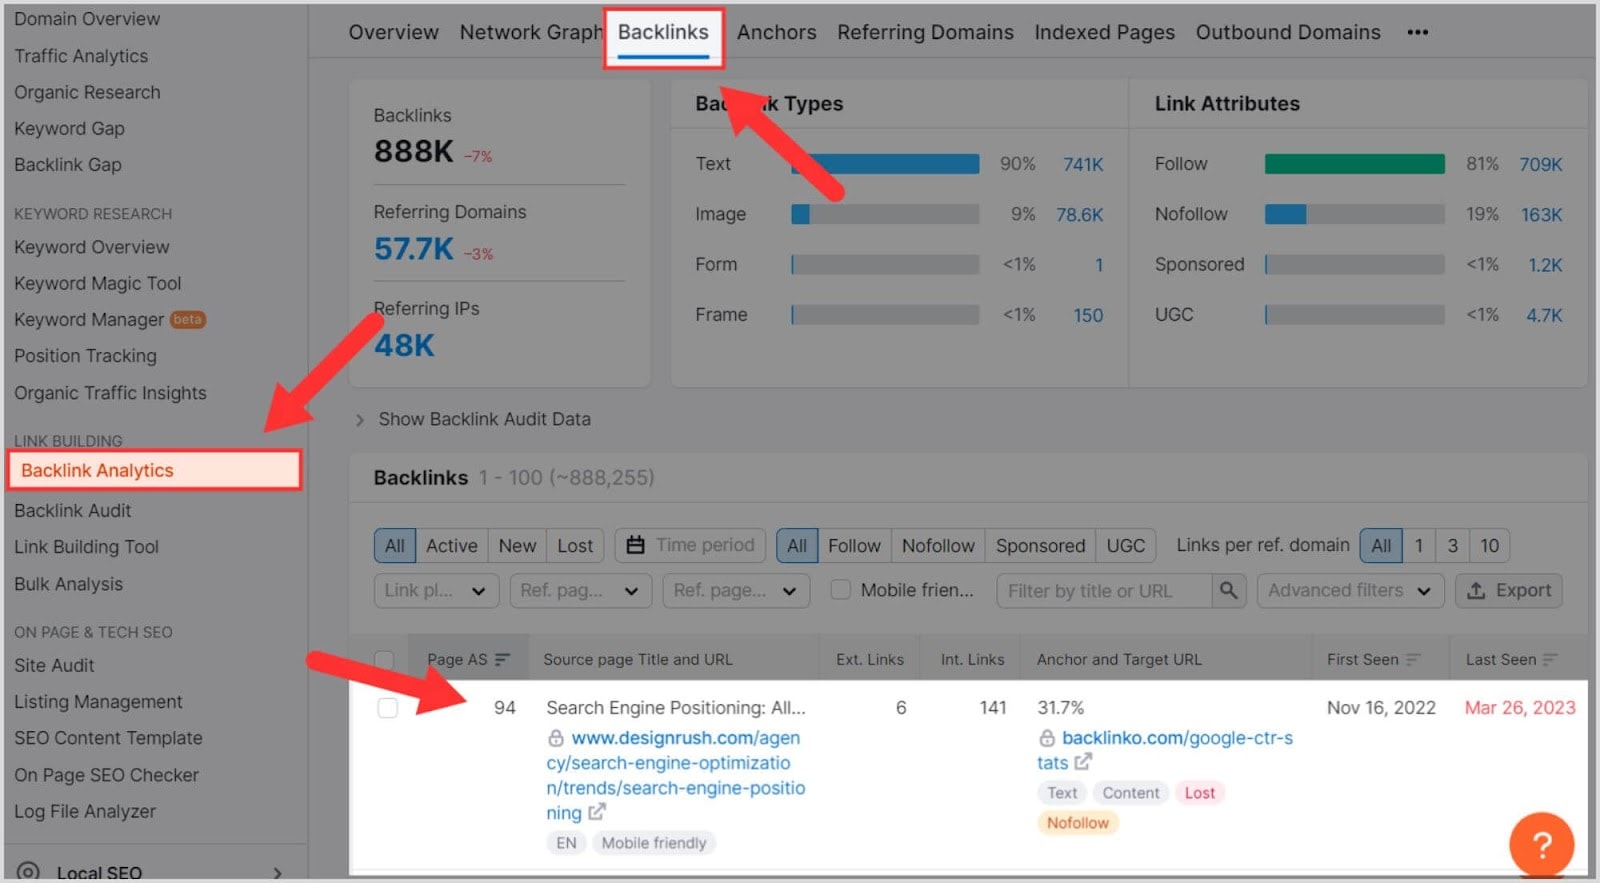 Find the backlink quality from the Analytics tool